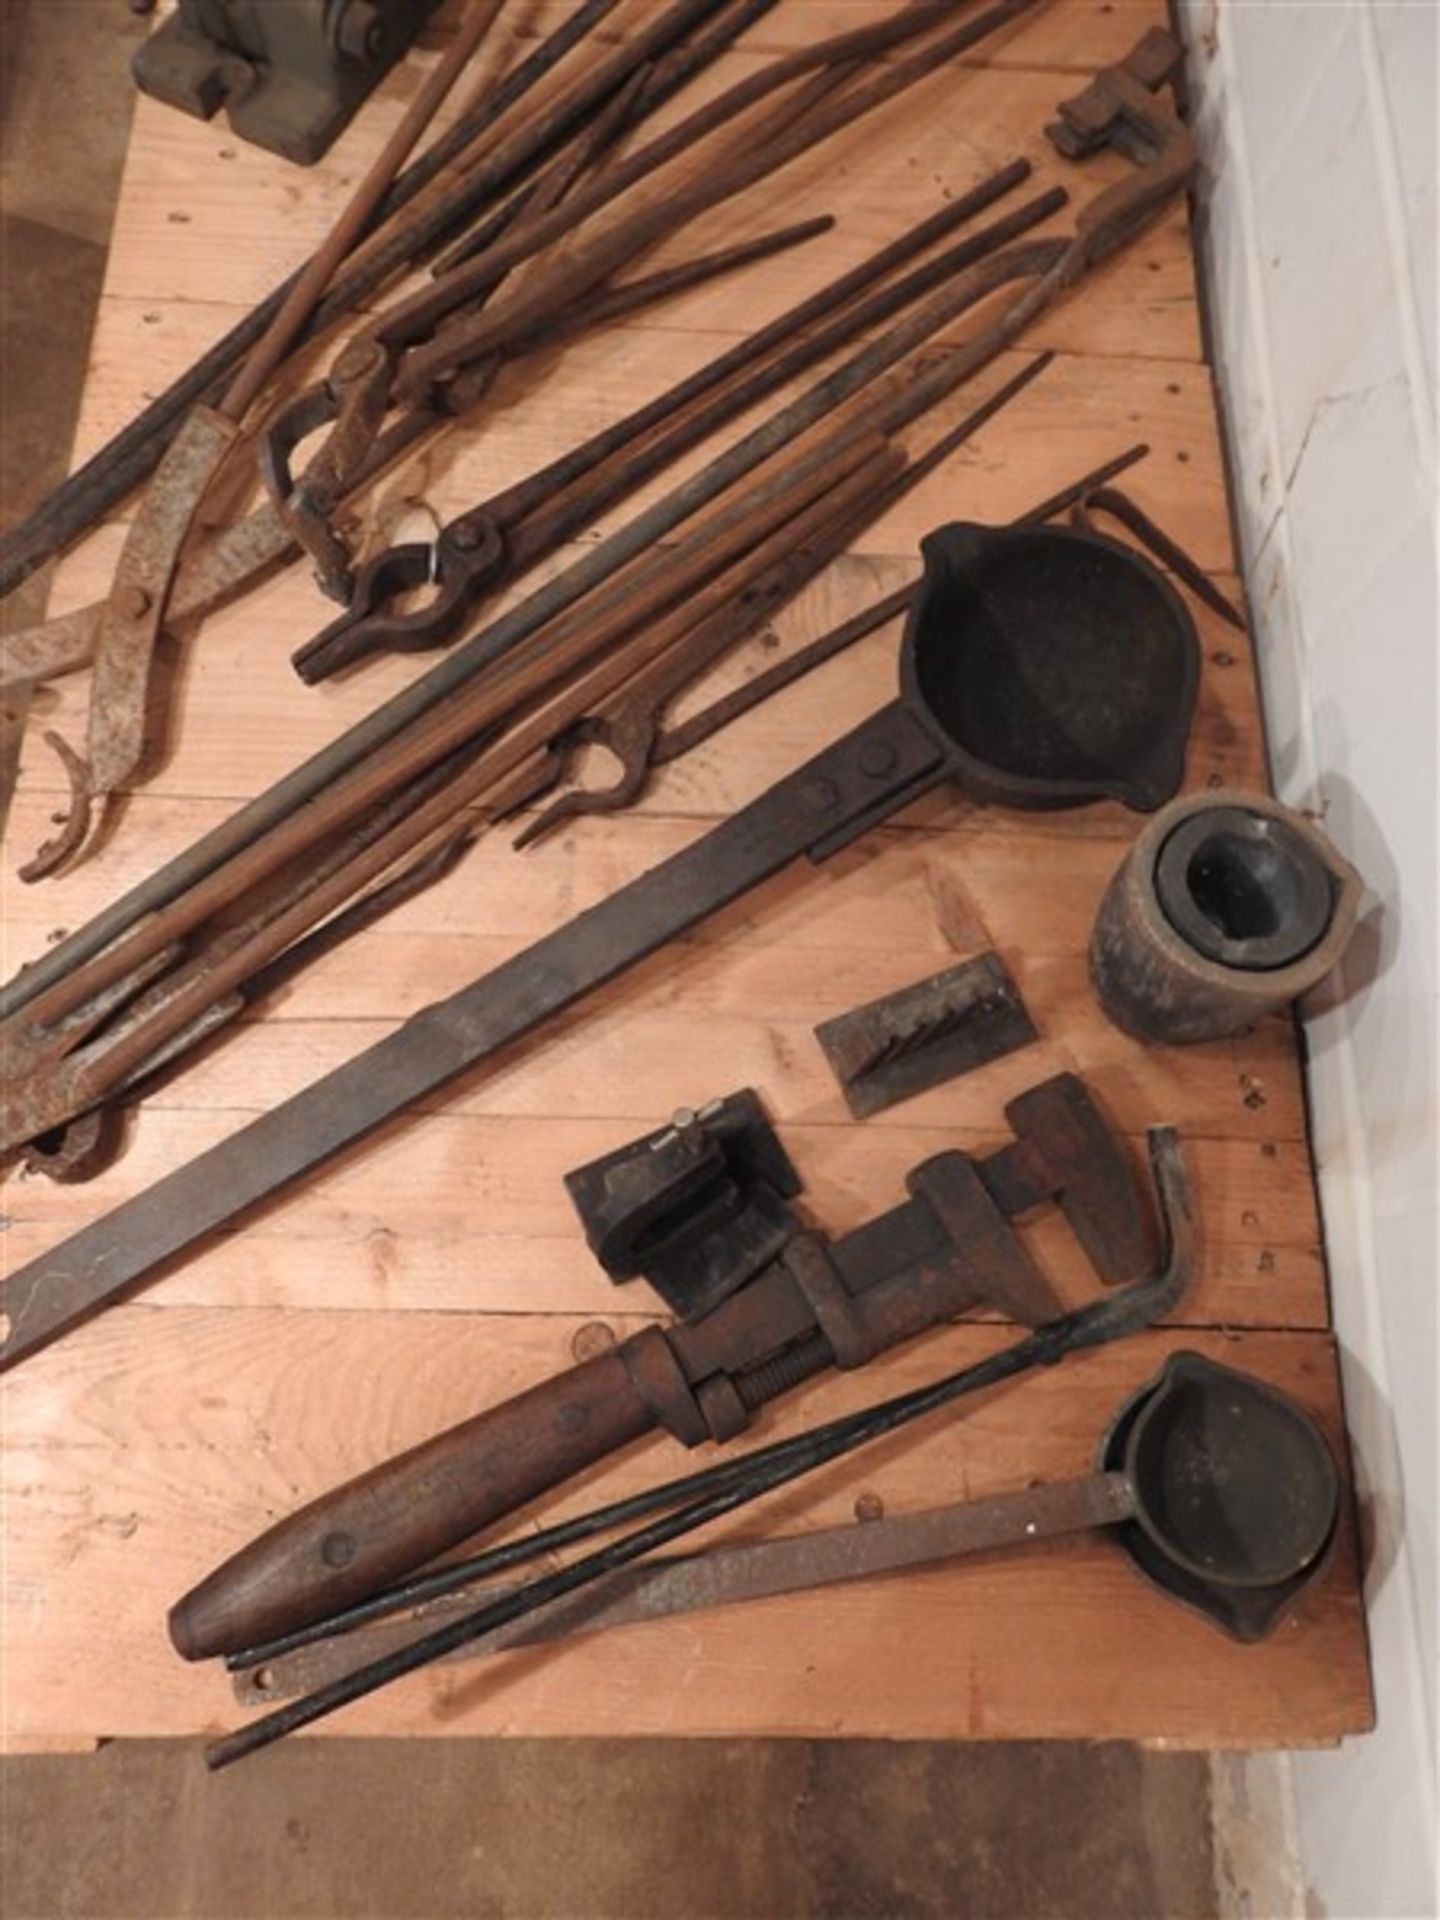 IRON WORKING TOOLS AND CABINET - Image 7 of 7